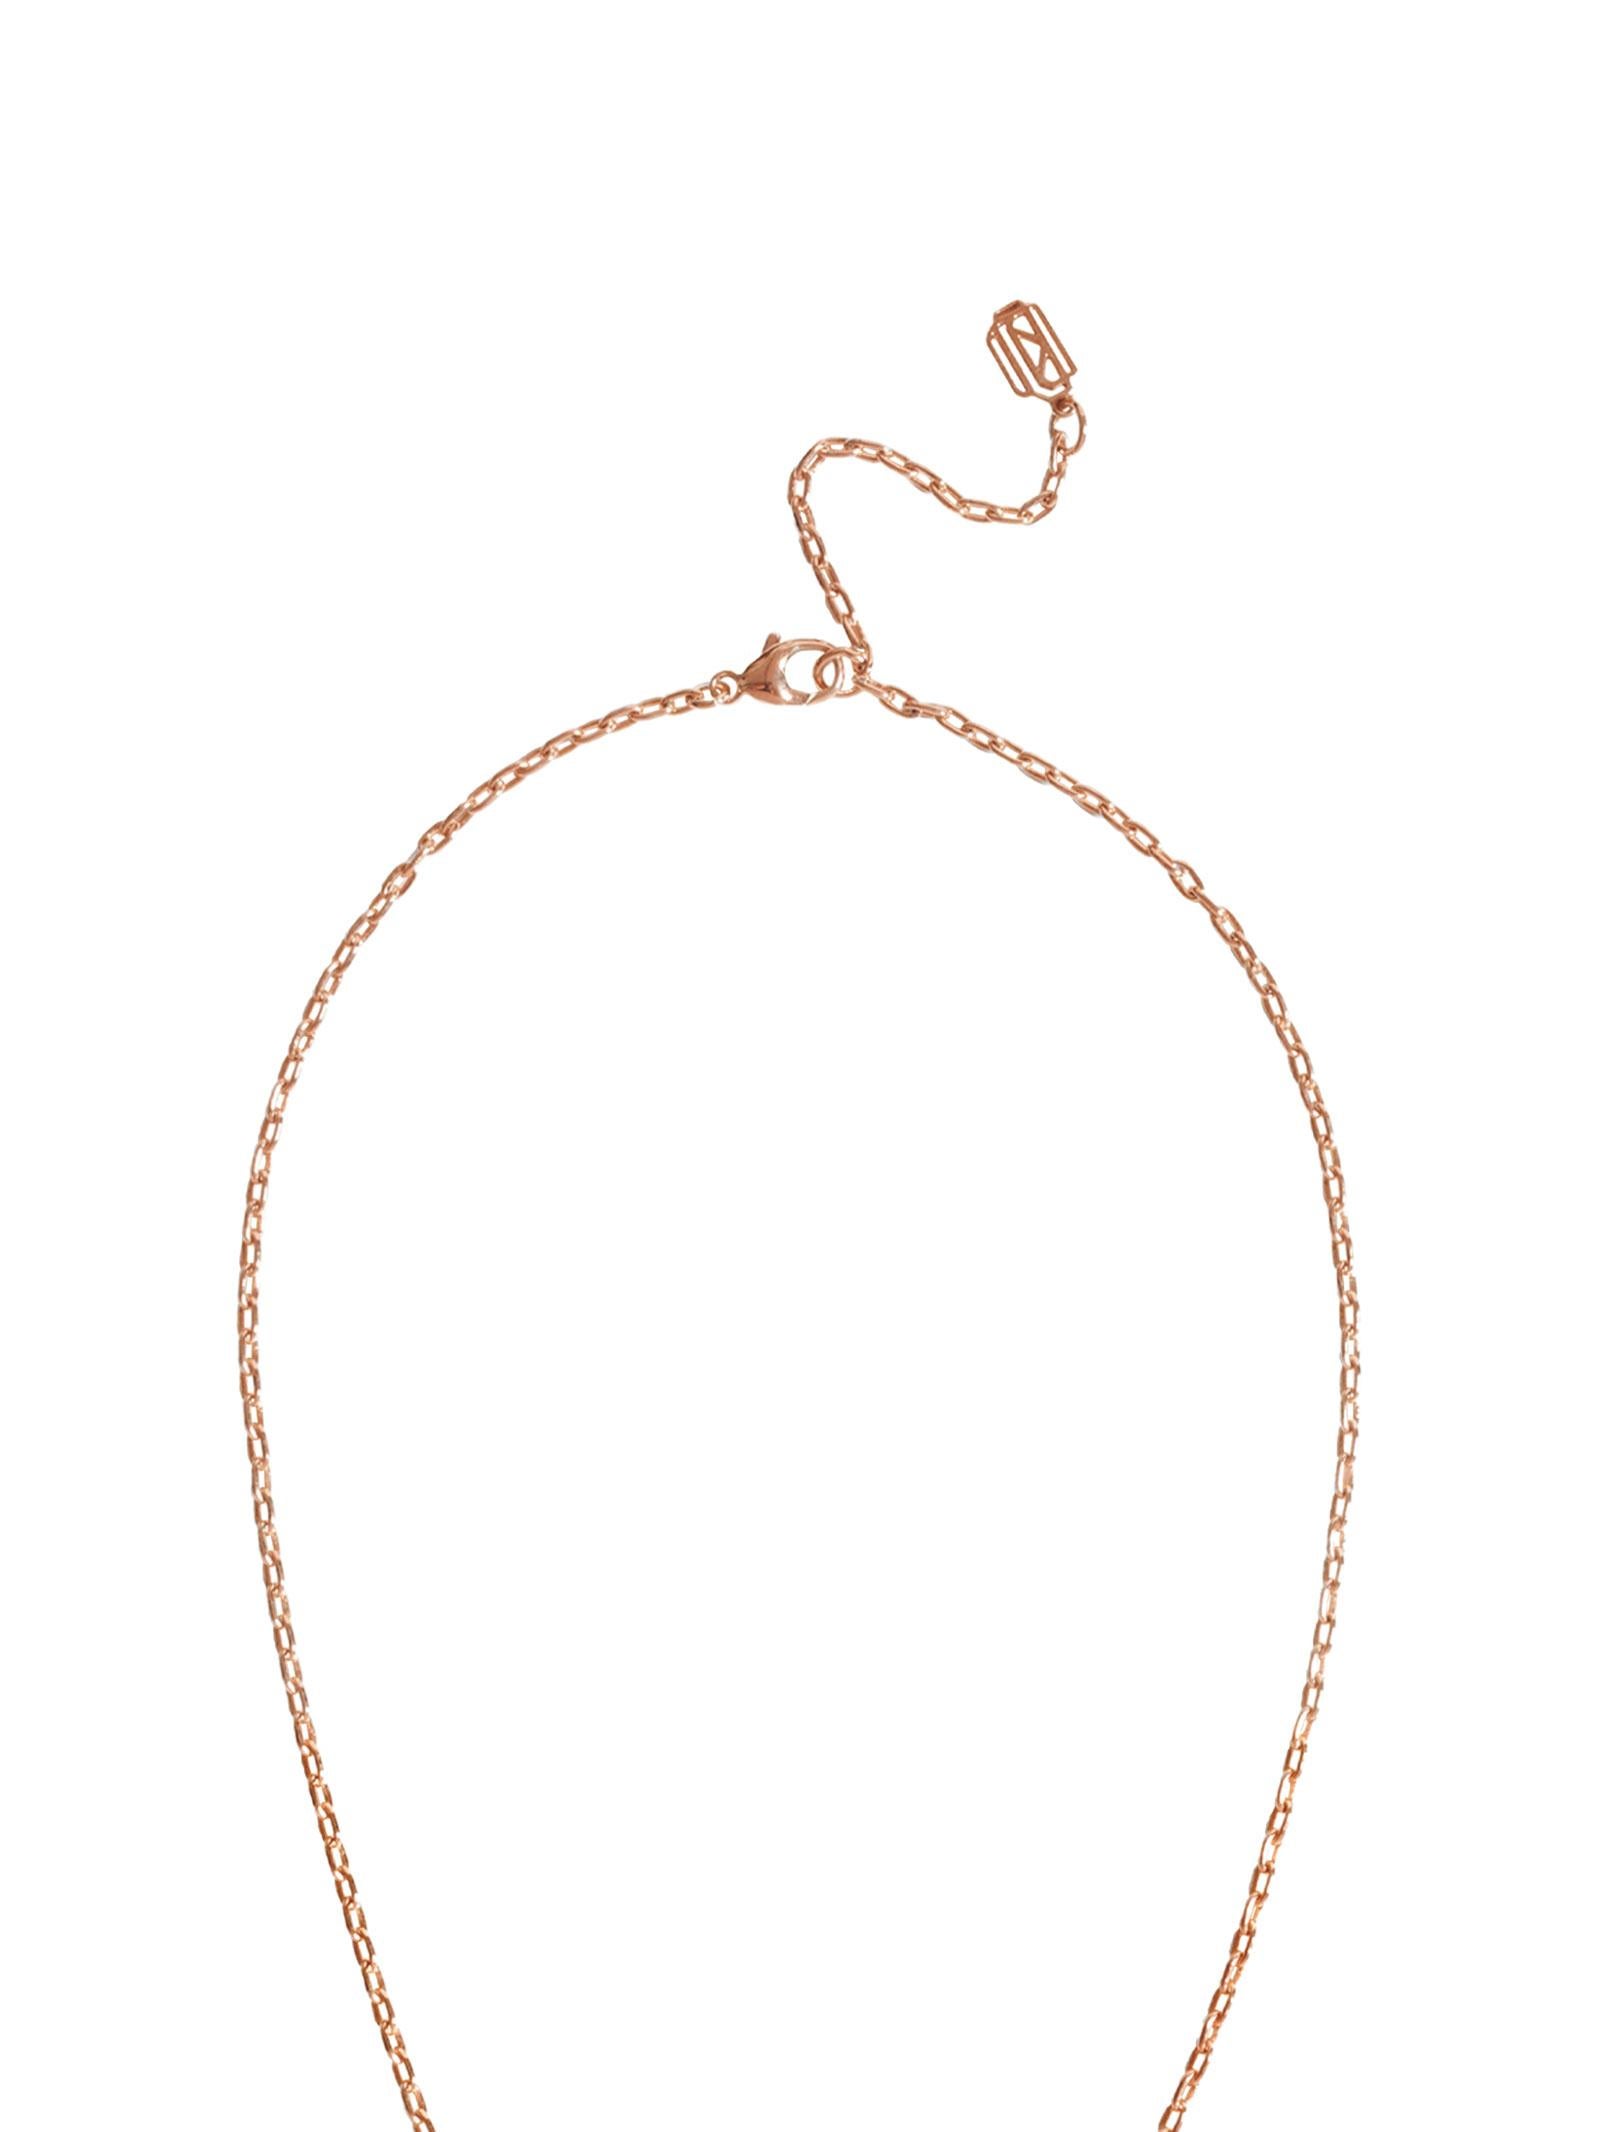 Amanti Chain-Linked Necklace with two hexagon pendant hand-crafted in 18-karat rose gold

DETAILS
The Amanti Lariat Chain Necklace by Angie Marei features a long 18-karat rose gold chain with Gothic-era style hexagonal pendants - the sacred